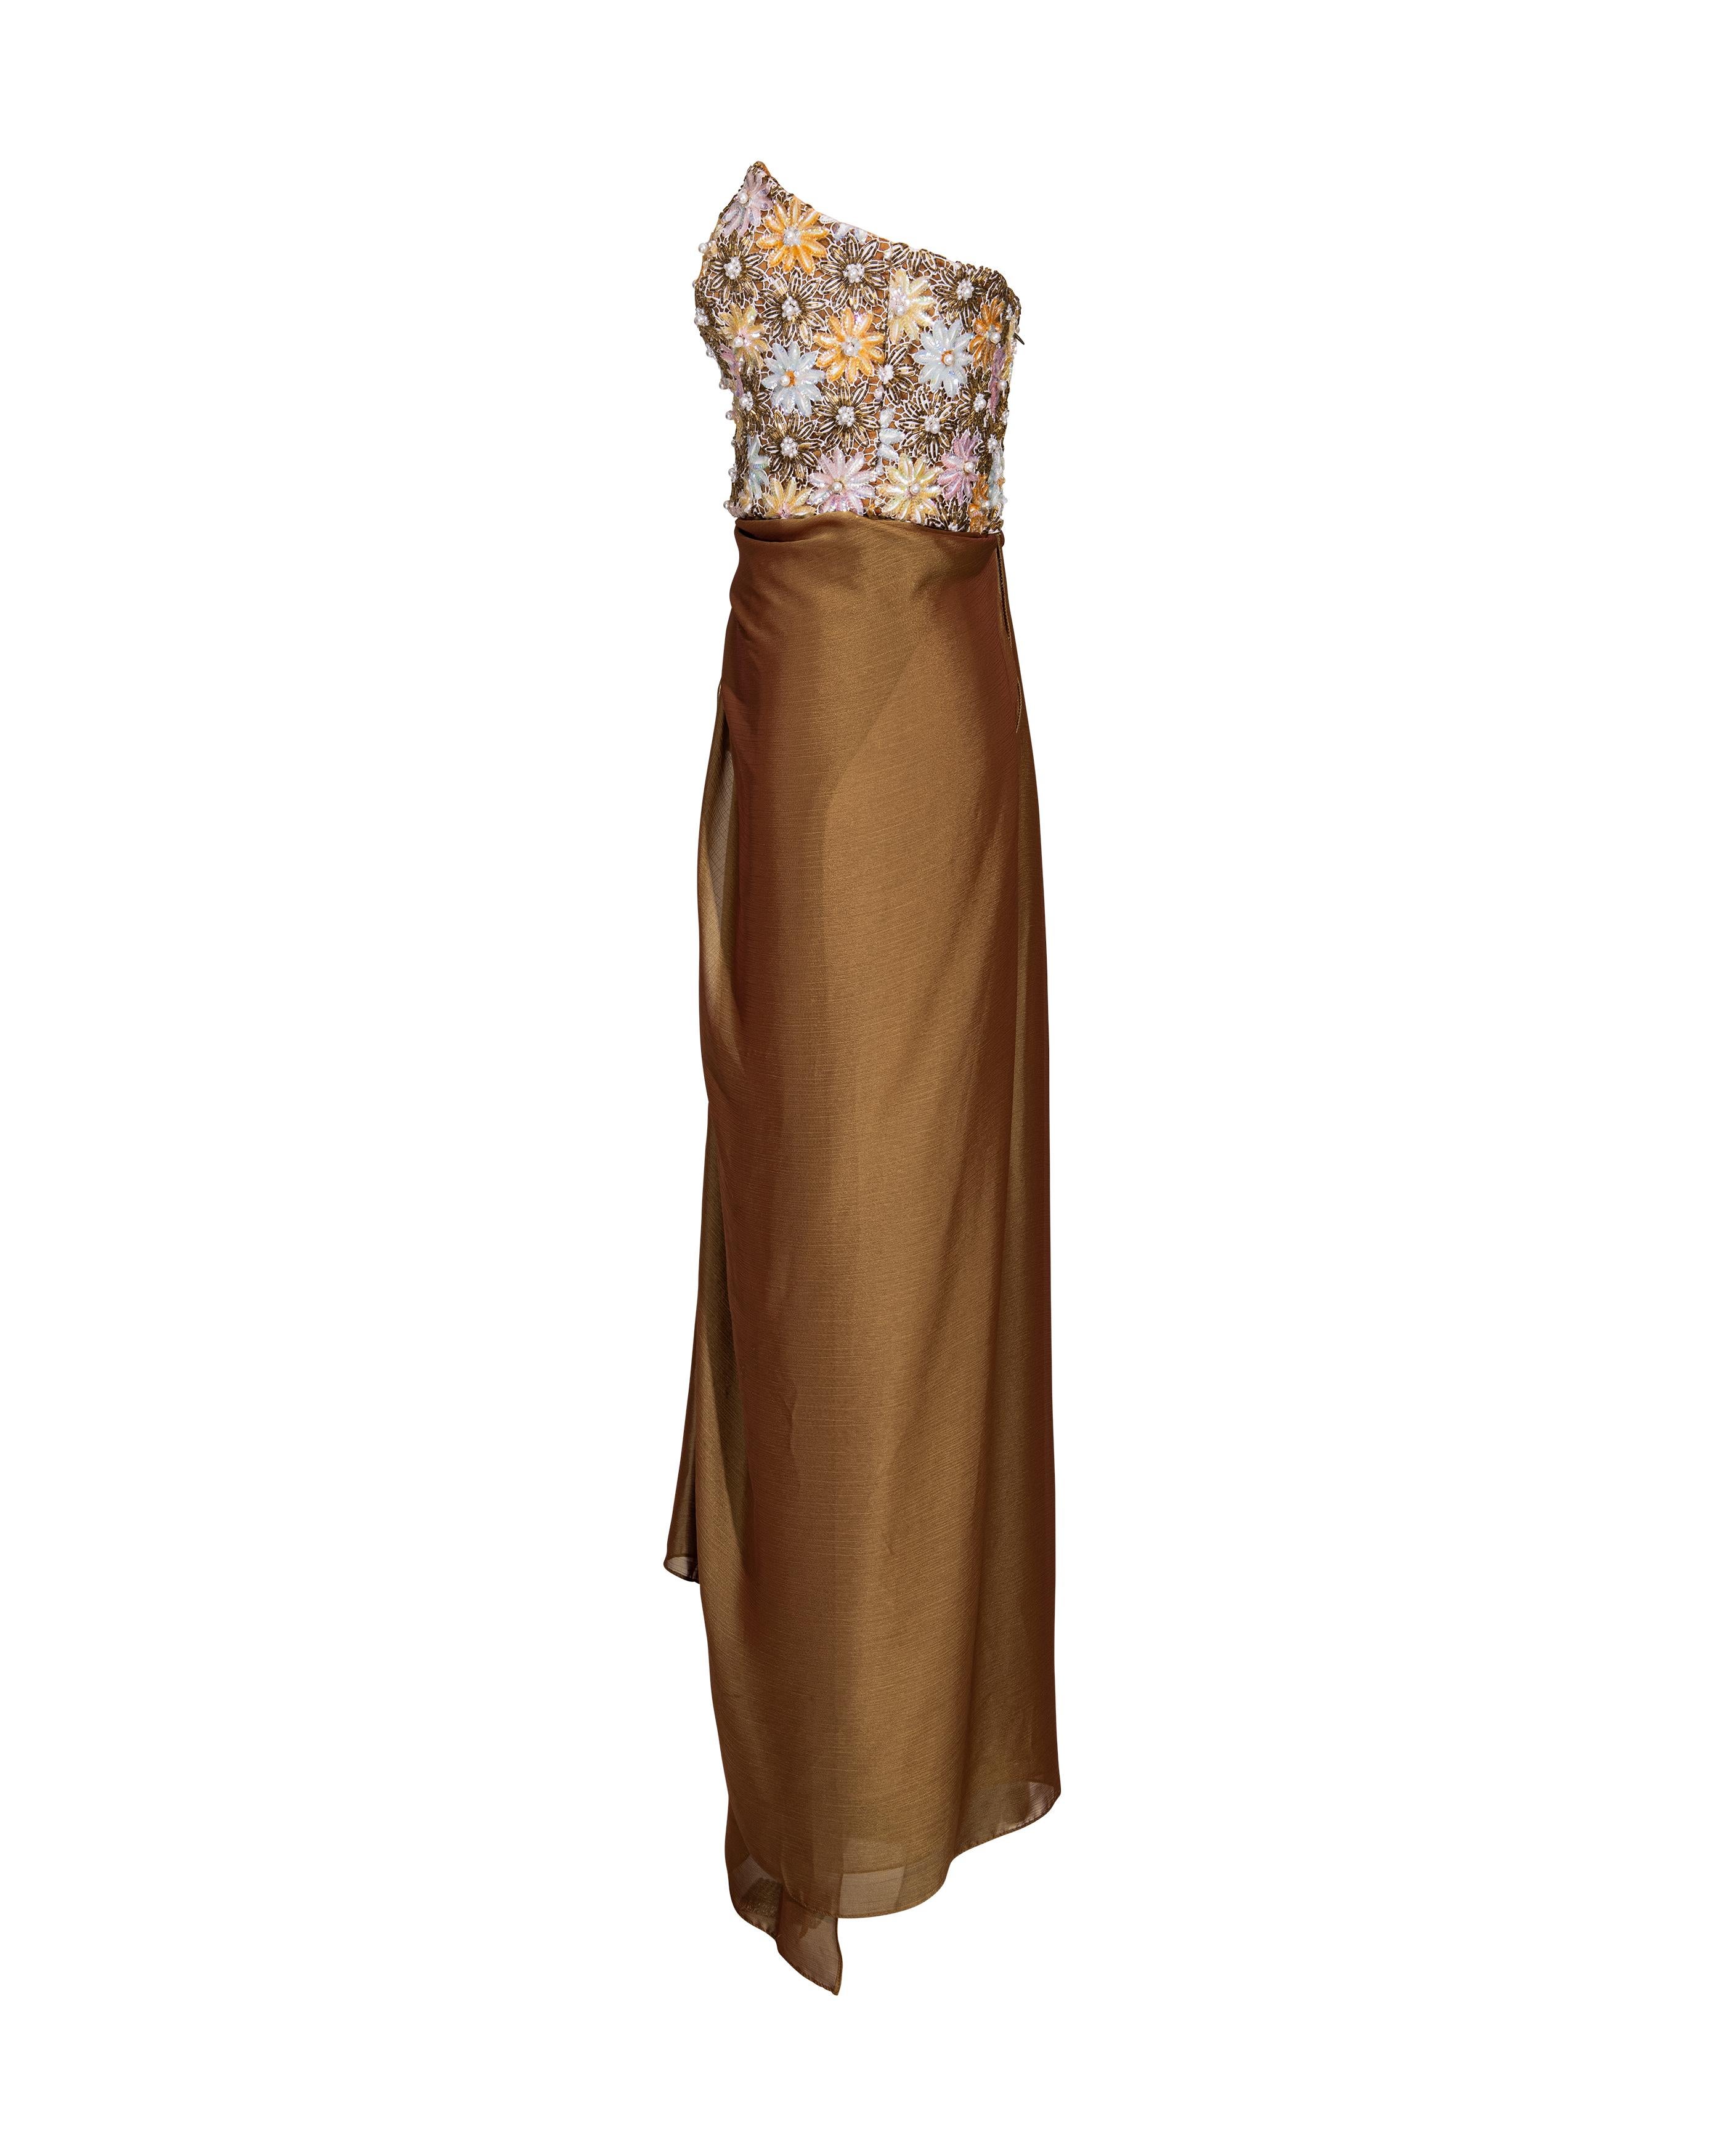 c. 1991 Nina Ricci Embellished Copper Strapless Gown with Stole 2